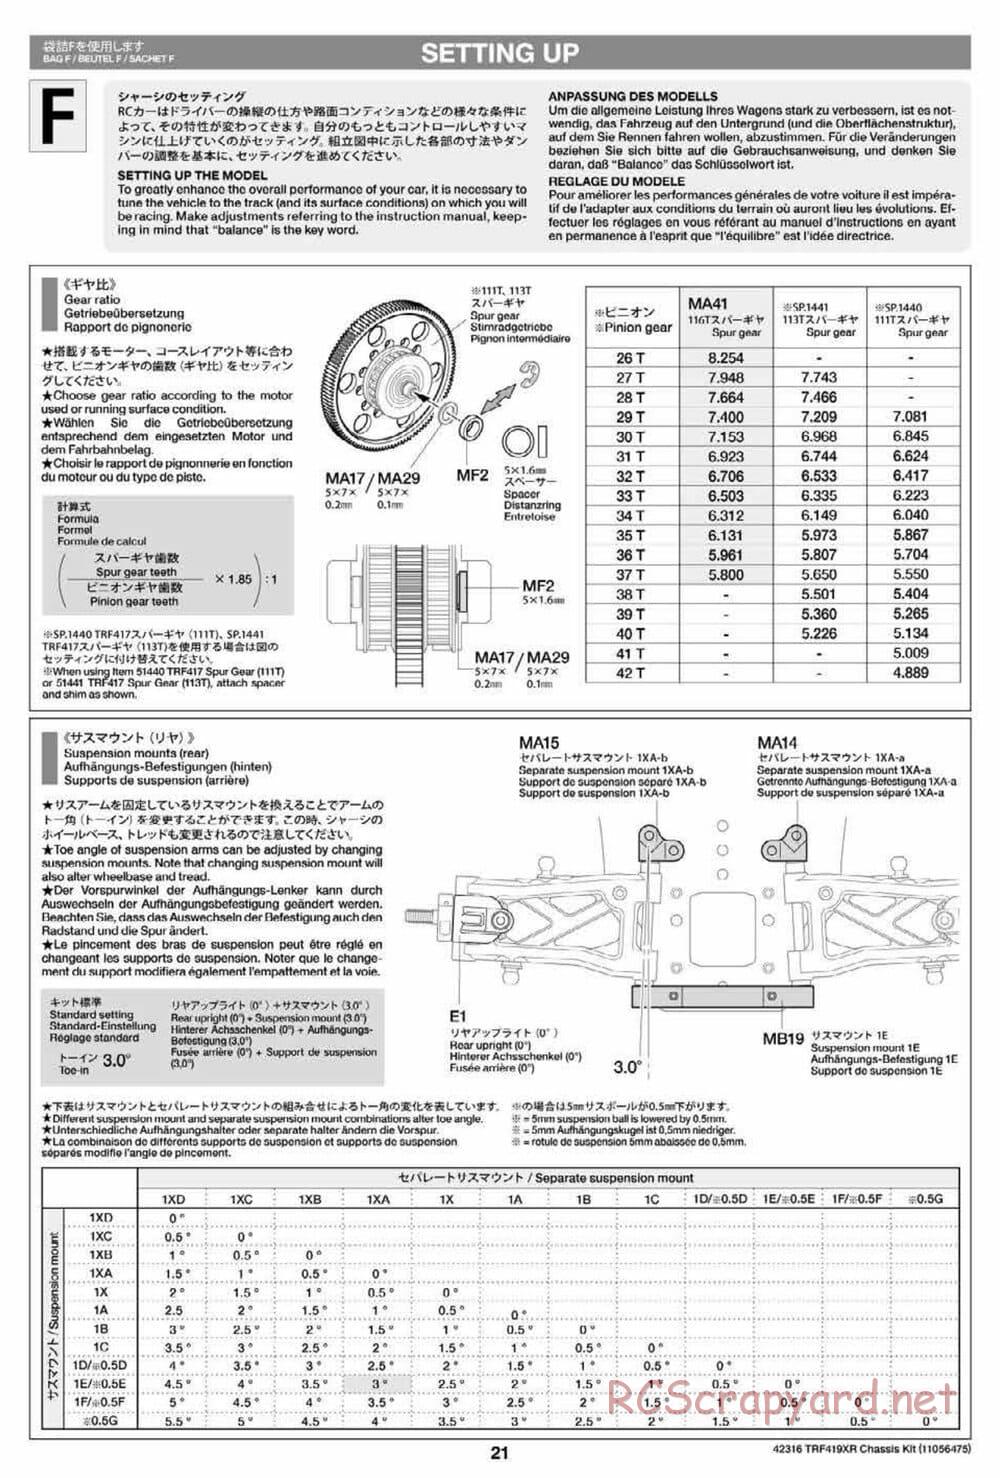 Tamiya - TRF419XR Chassis - Manual - Page 21